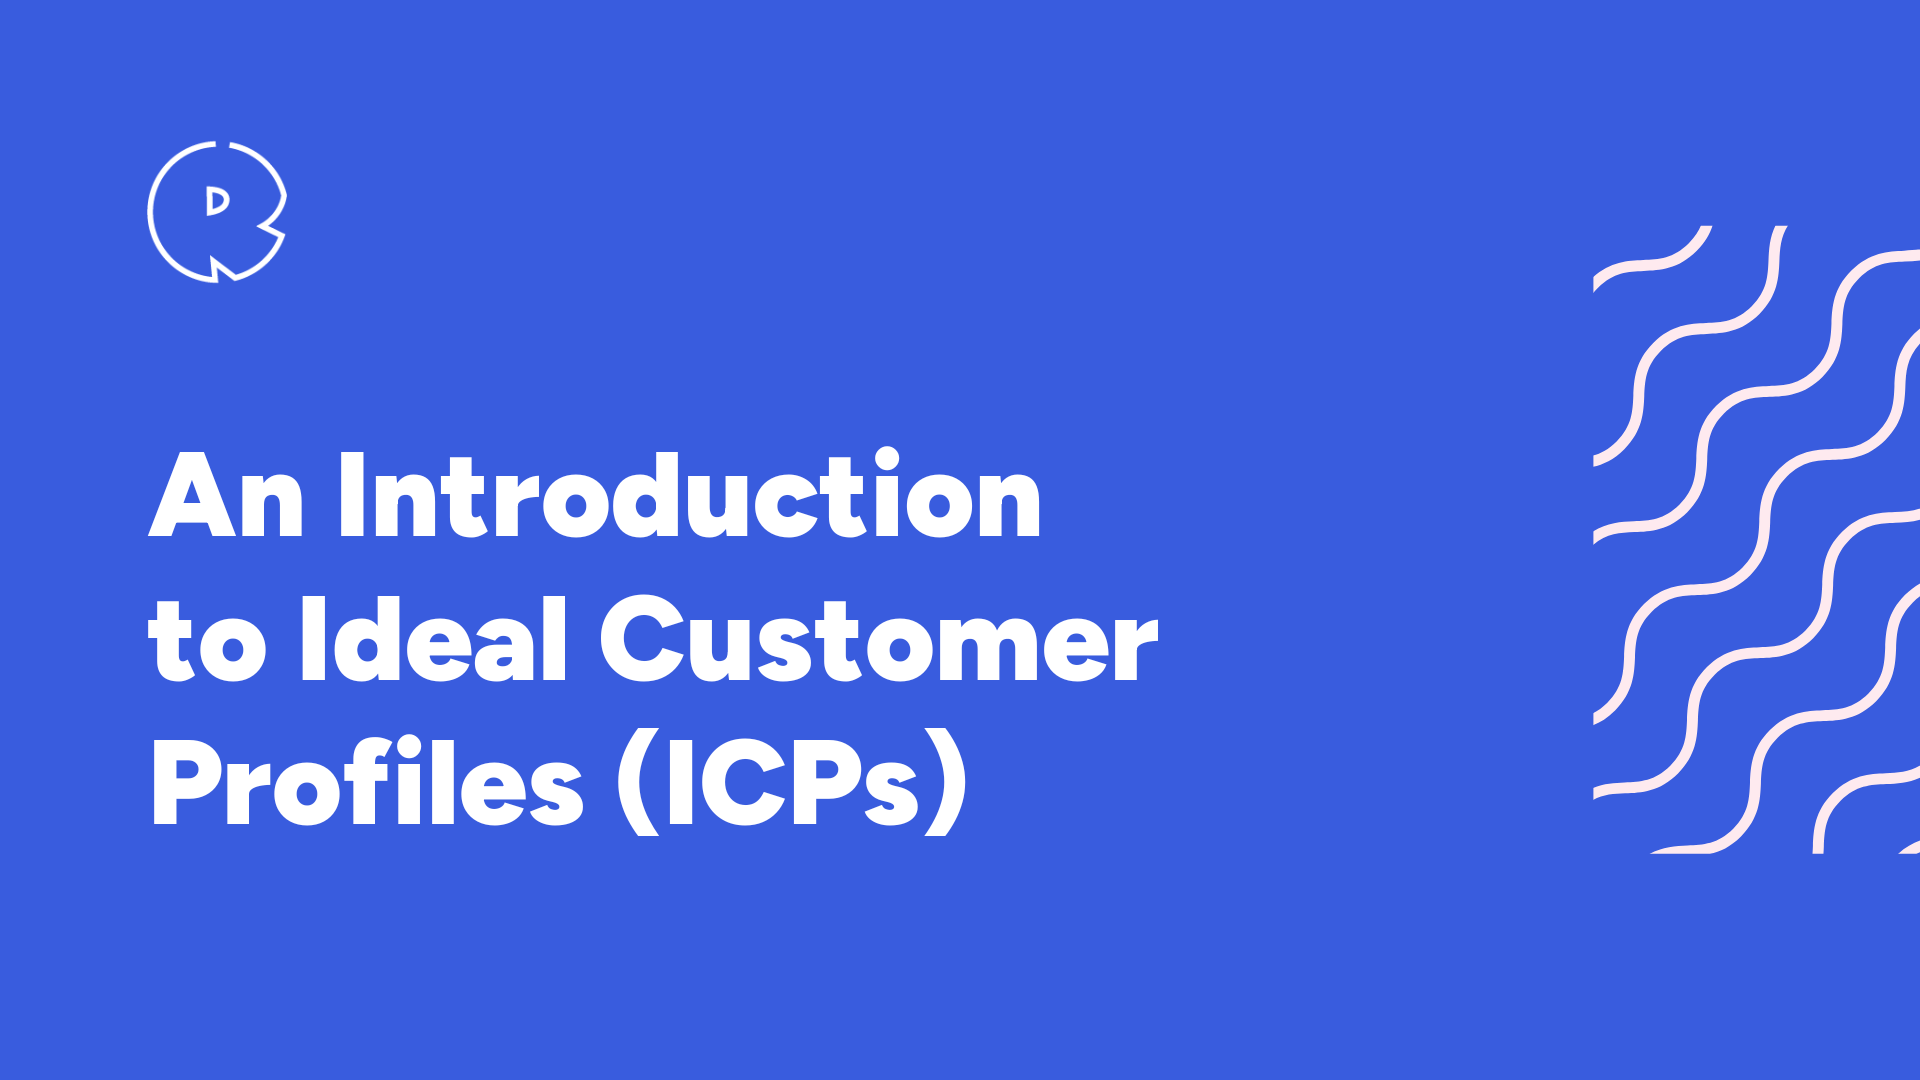 An Introduction to Ideal Customer Profiles (ICPs)